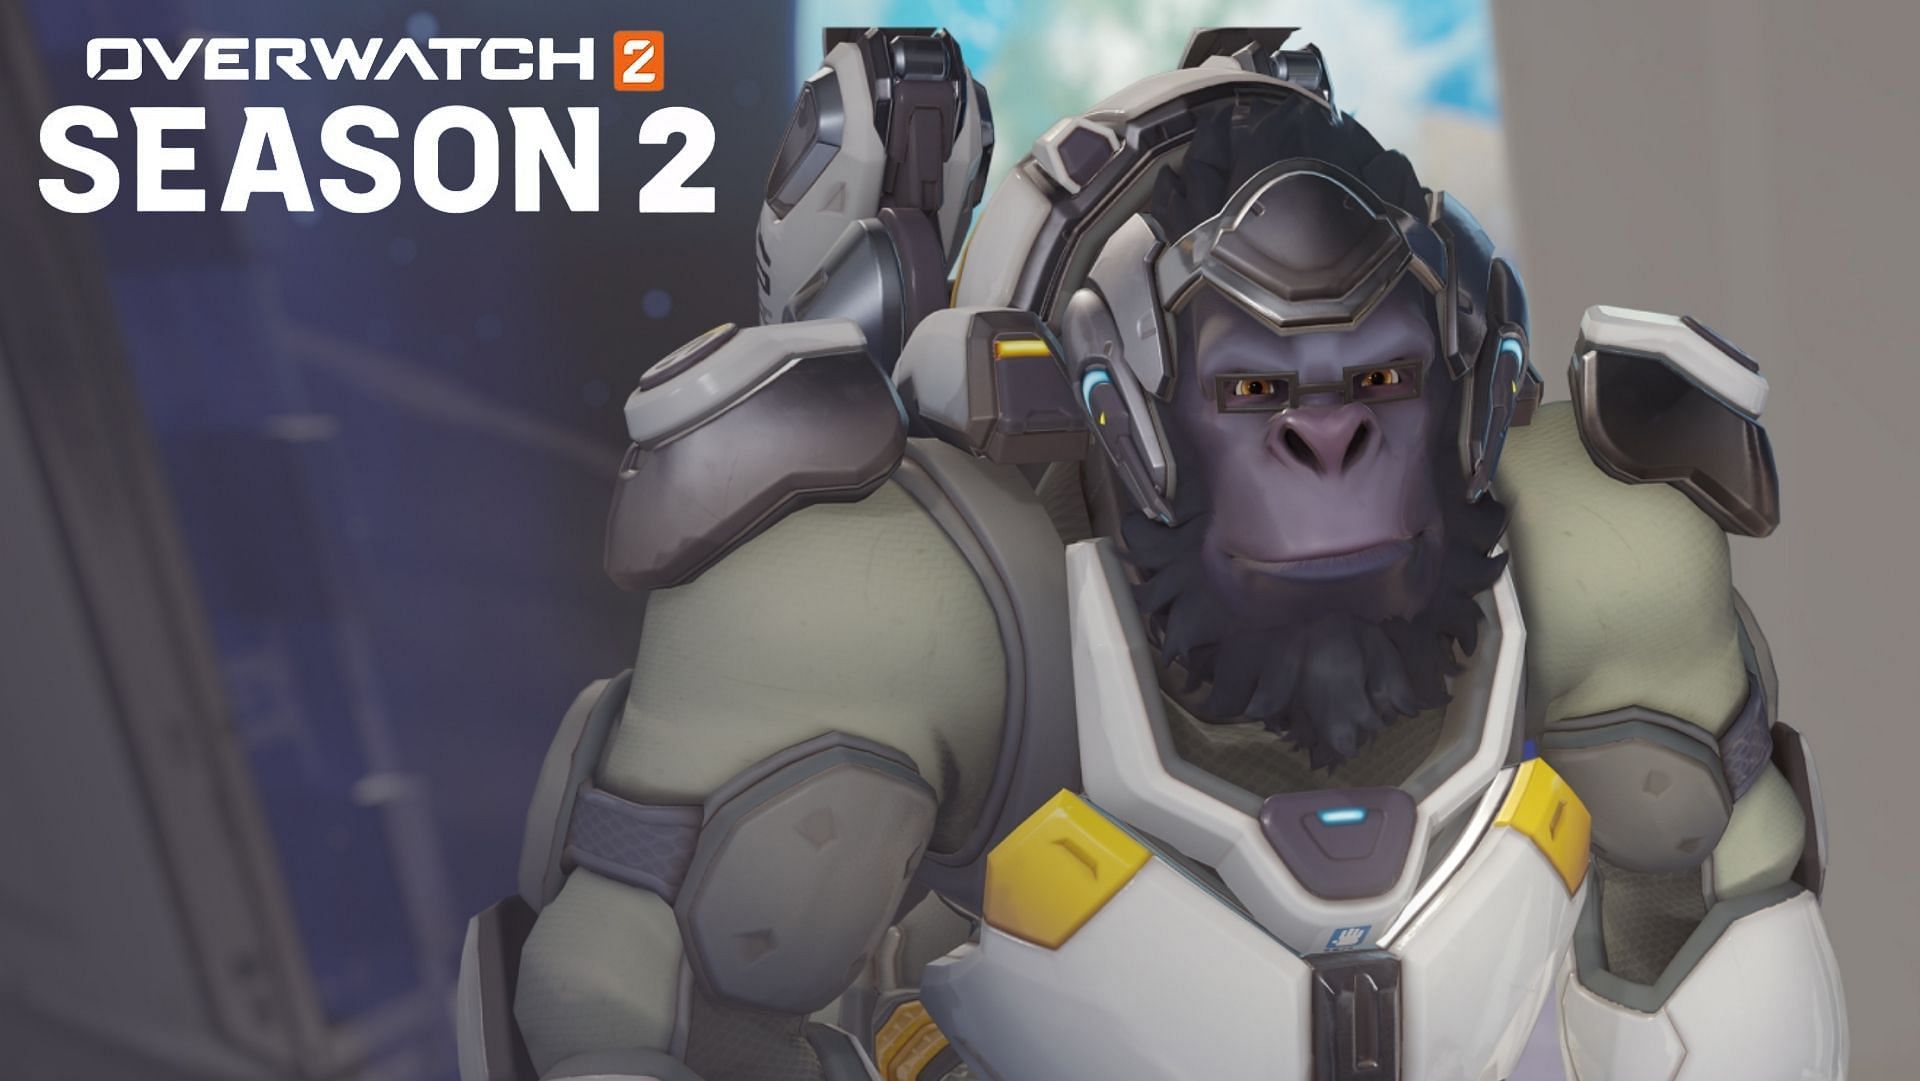 Winston is an excellent Tank Hero in Overwatch 2 (Image via Blizzard Entertainment)